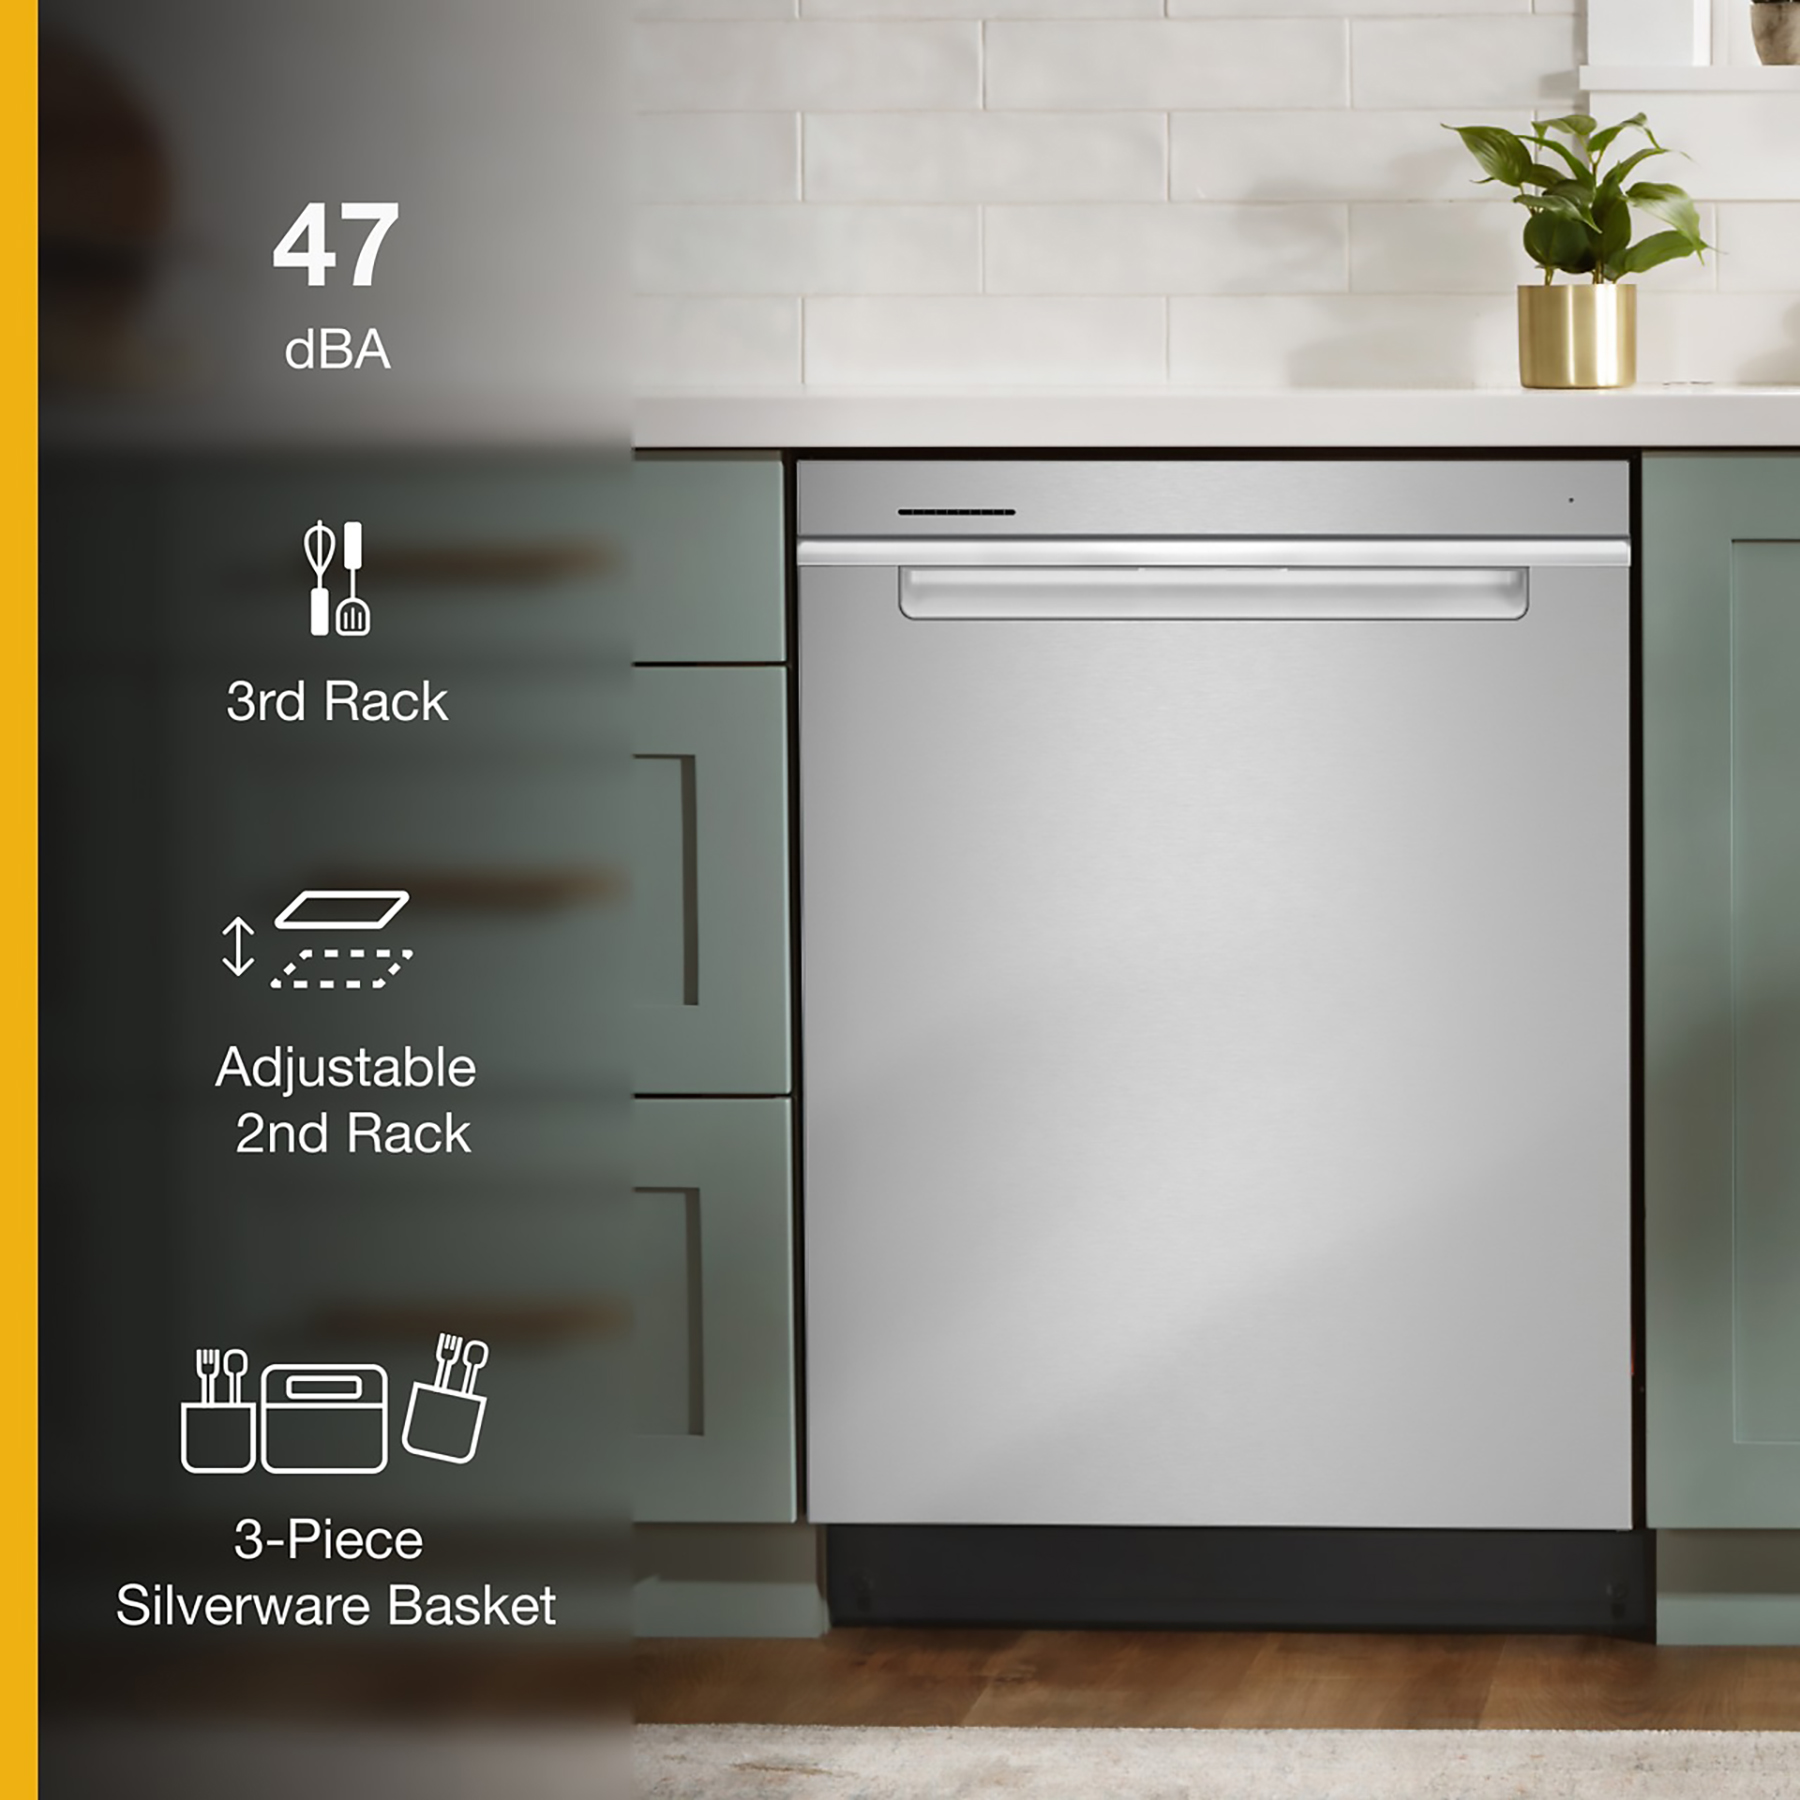 WHIRLPOOL 24 INCH PORTABLE DISHWASHER 5 CYCLE HI TEMPERATURE WASH DELAY  START OPTION WHITE LOCATED IN OUR PORTLAND OREGON APPLIANCE STORE SKU 17094